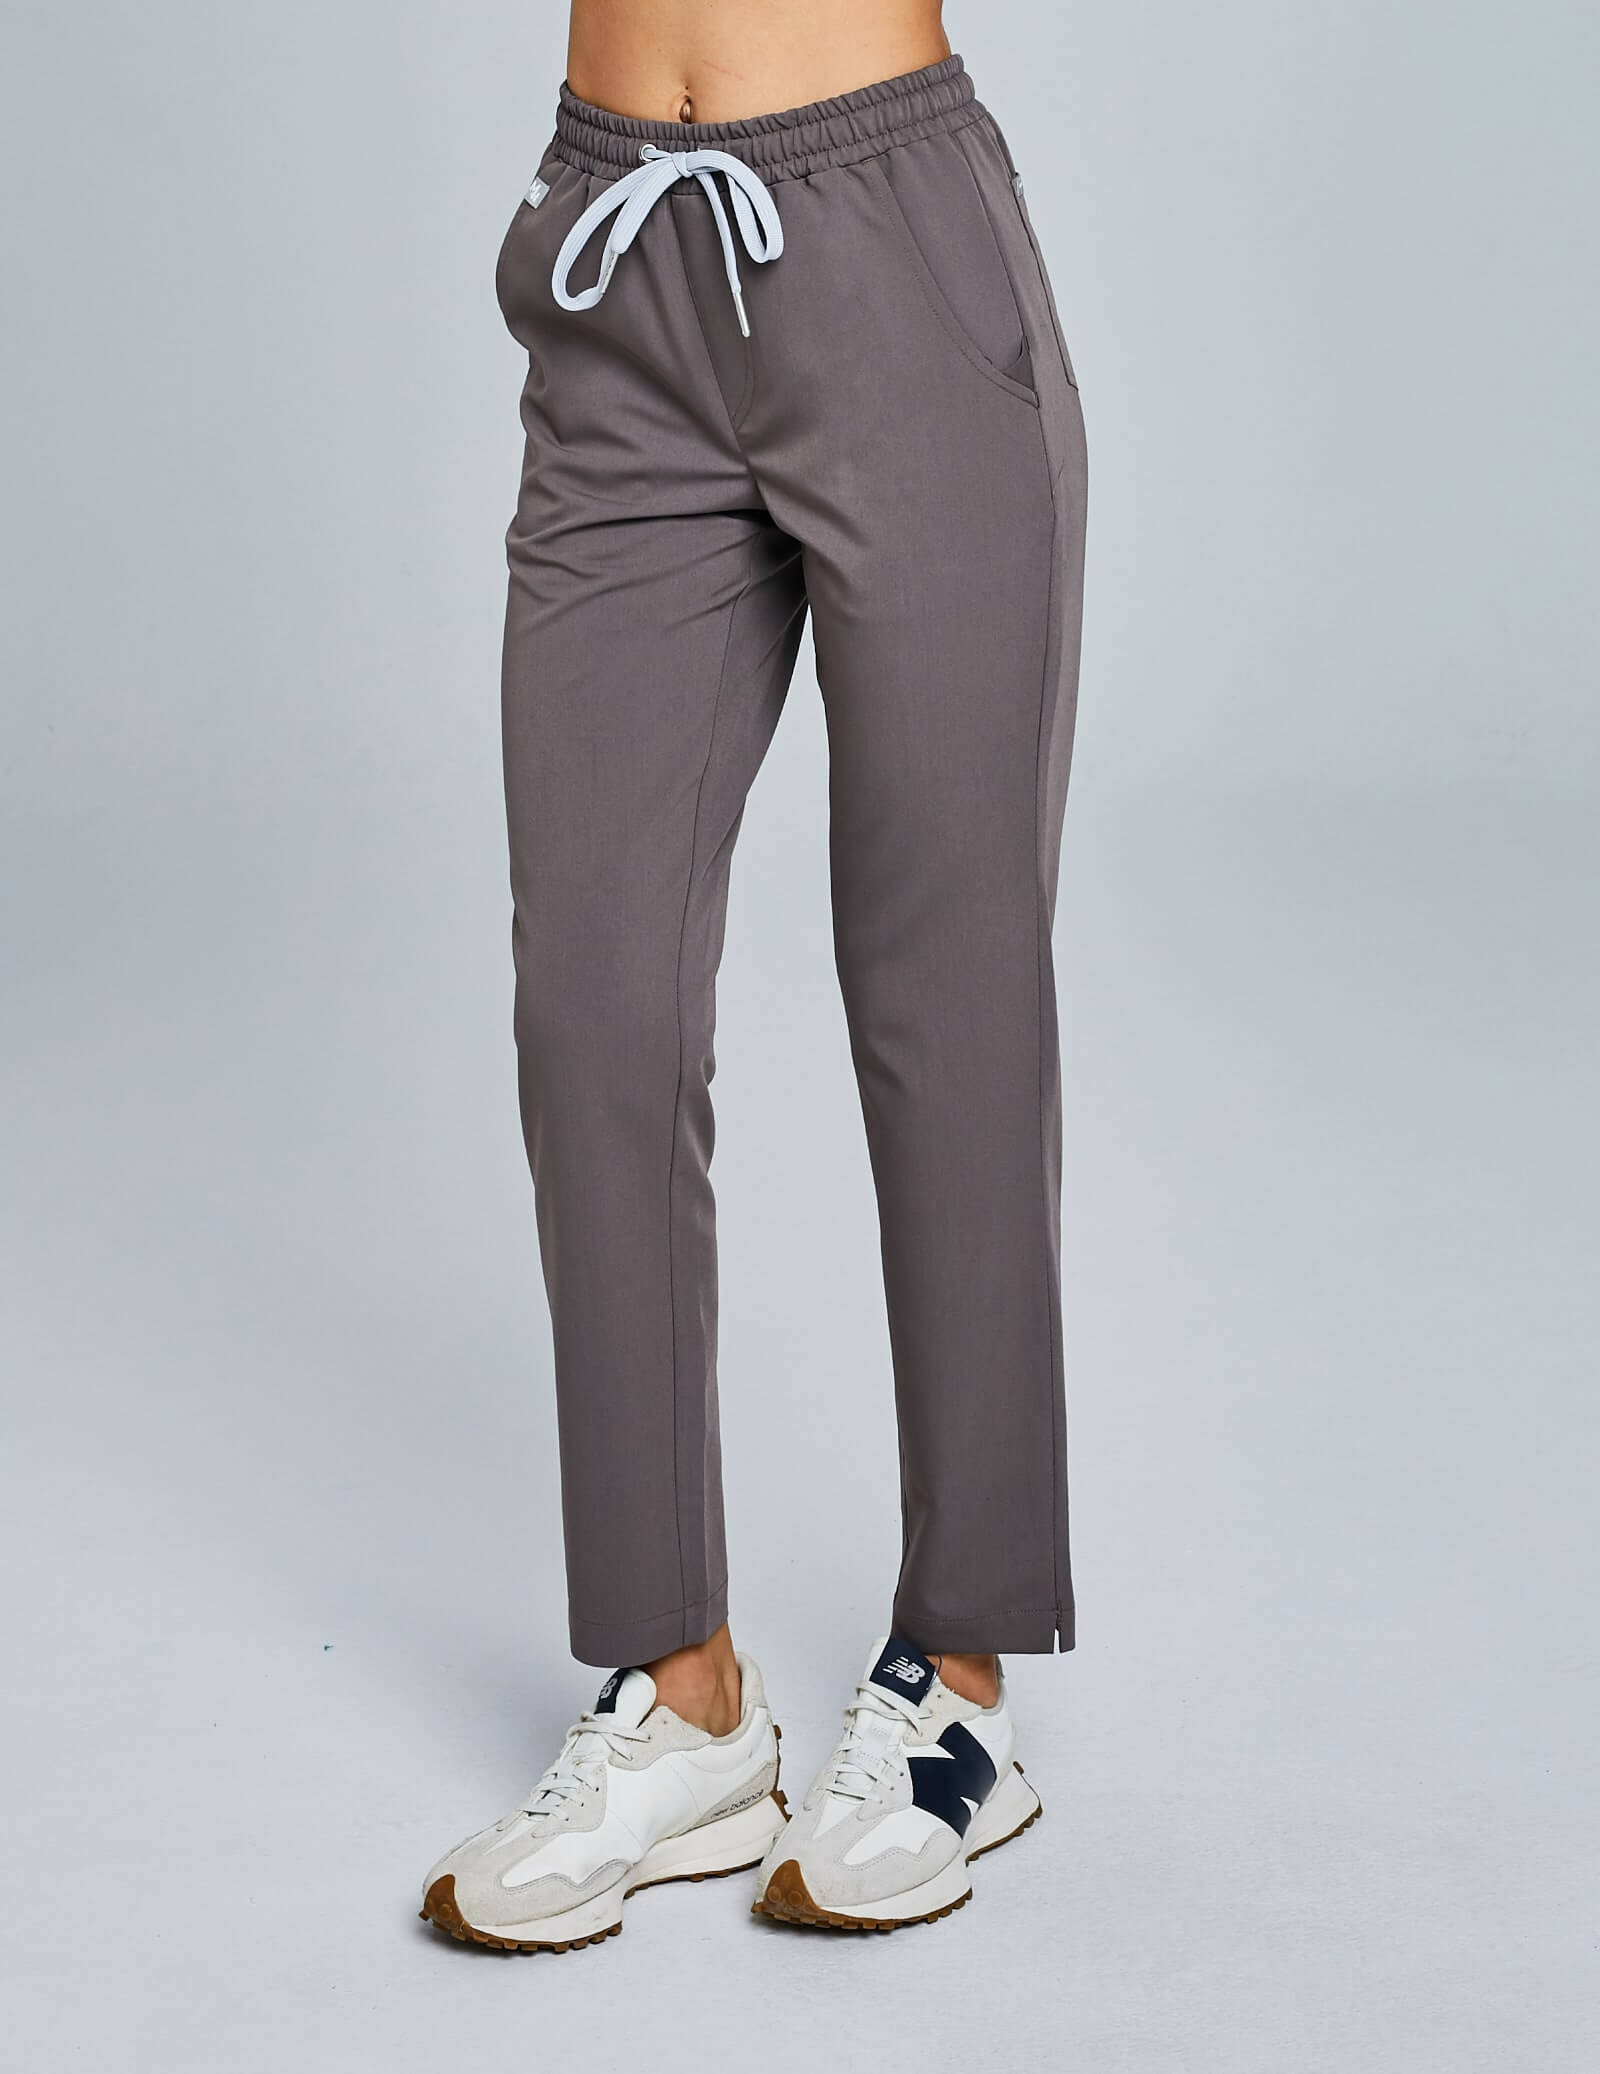 Women's Basic Trousers - CHOCOLATE BROWN